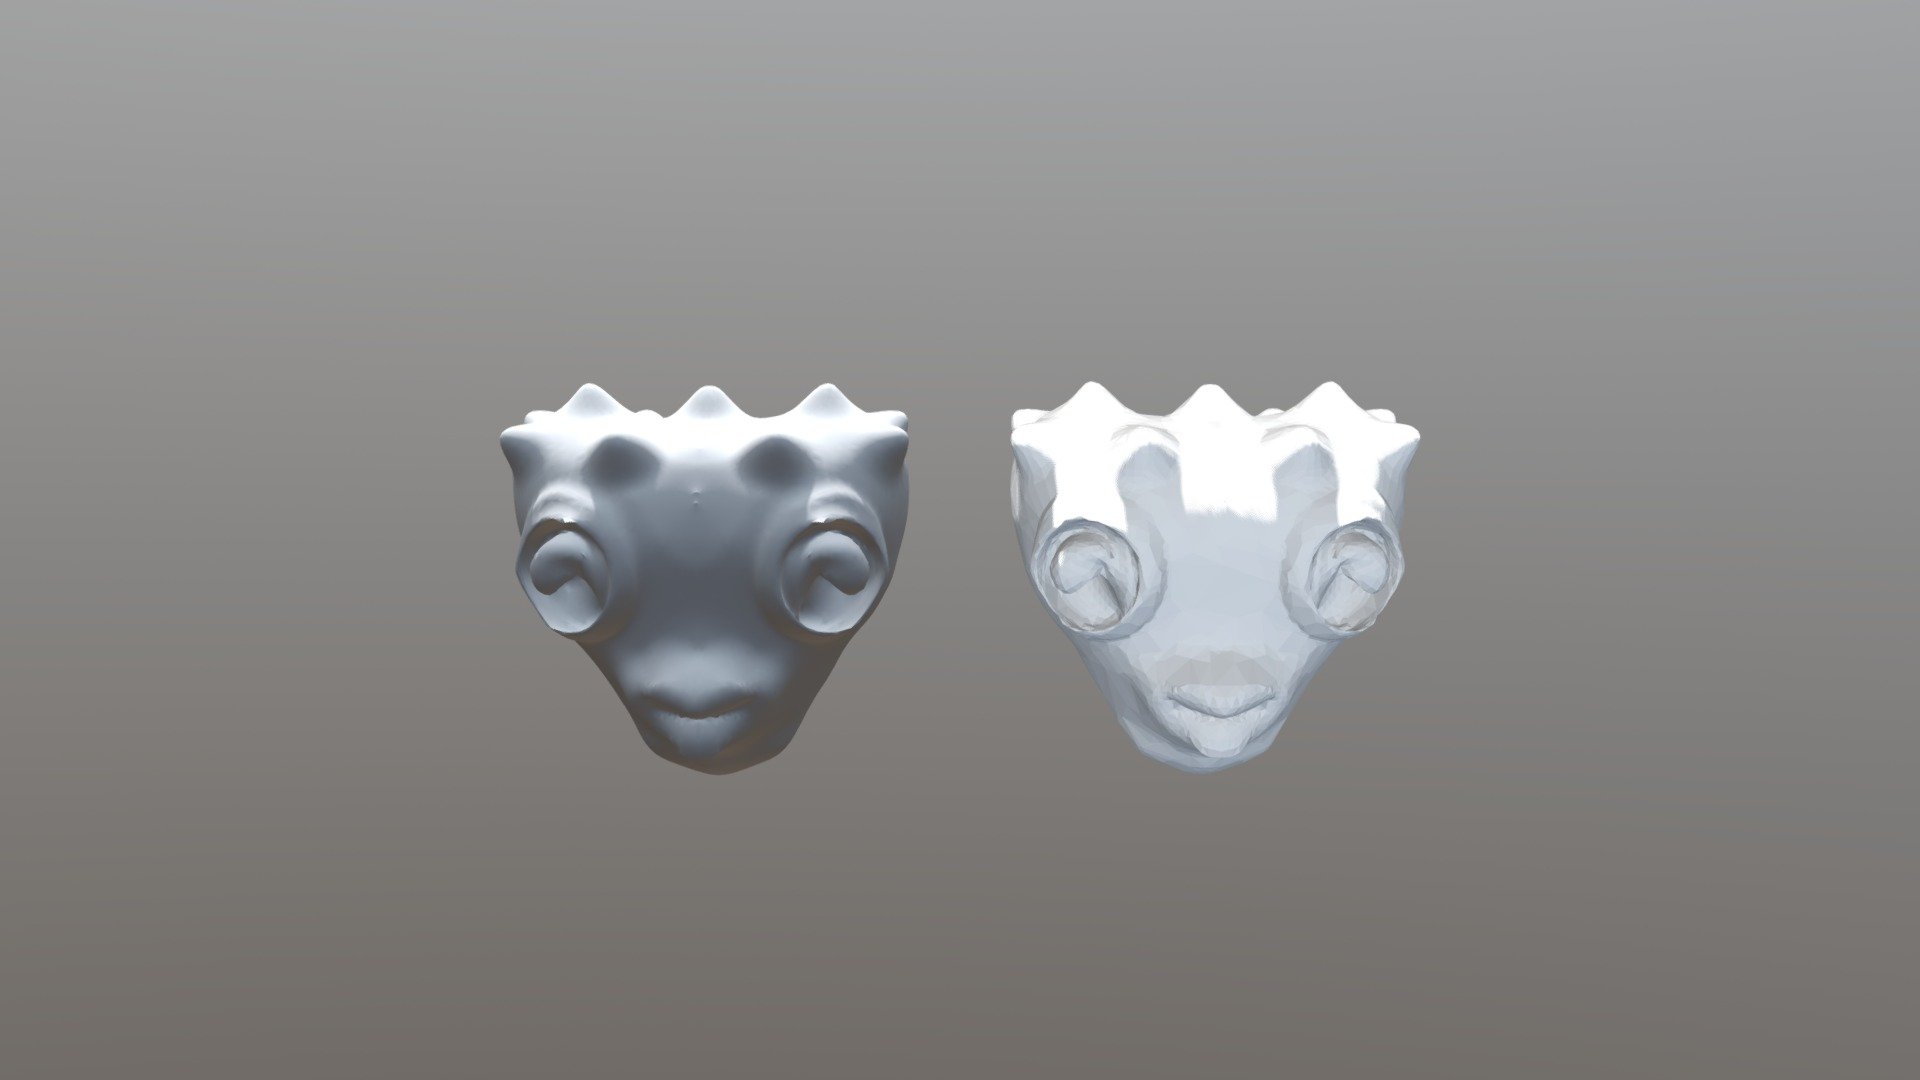 Moster Heads - Reupload